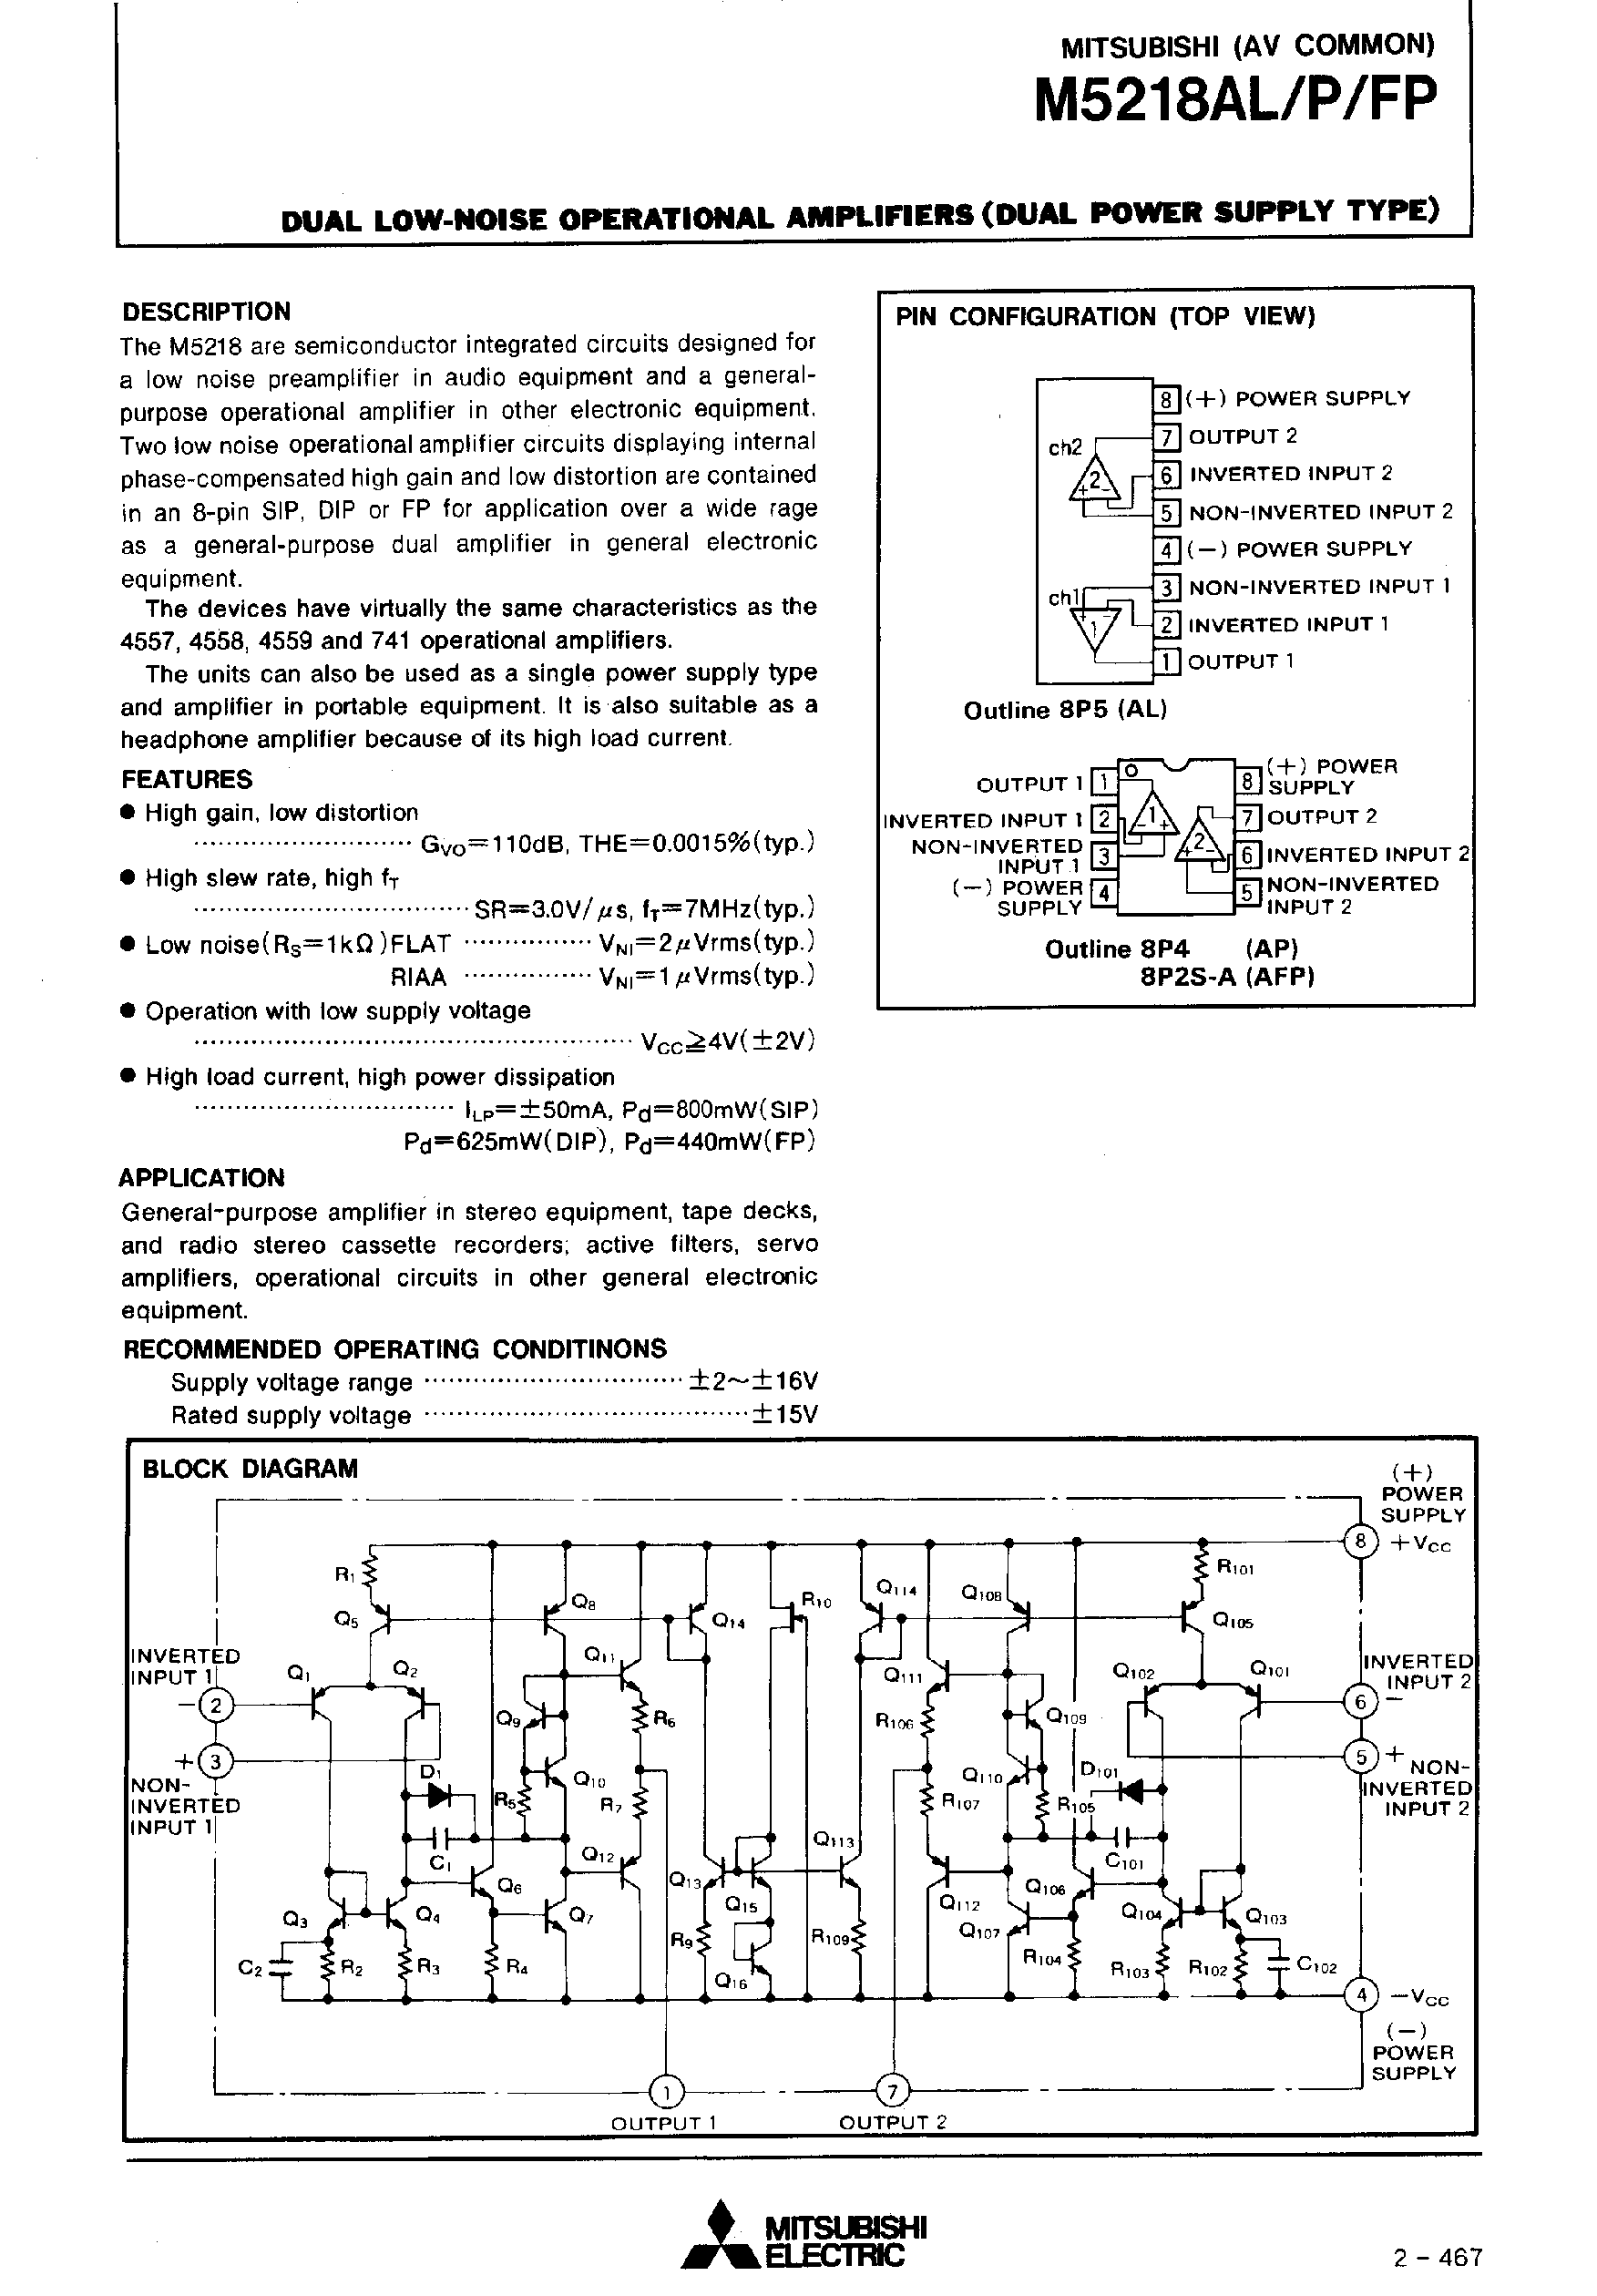 Datasheet M5218AL - DUAL LOW-NOISE OPERATIONAL AMPLIFIERS(DUAL POWER SUPPLY TYPE) page 1